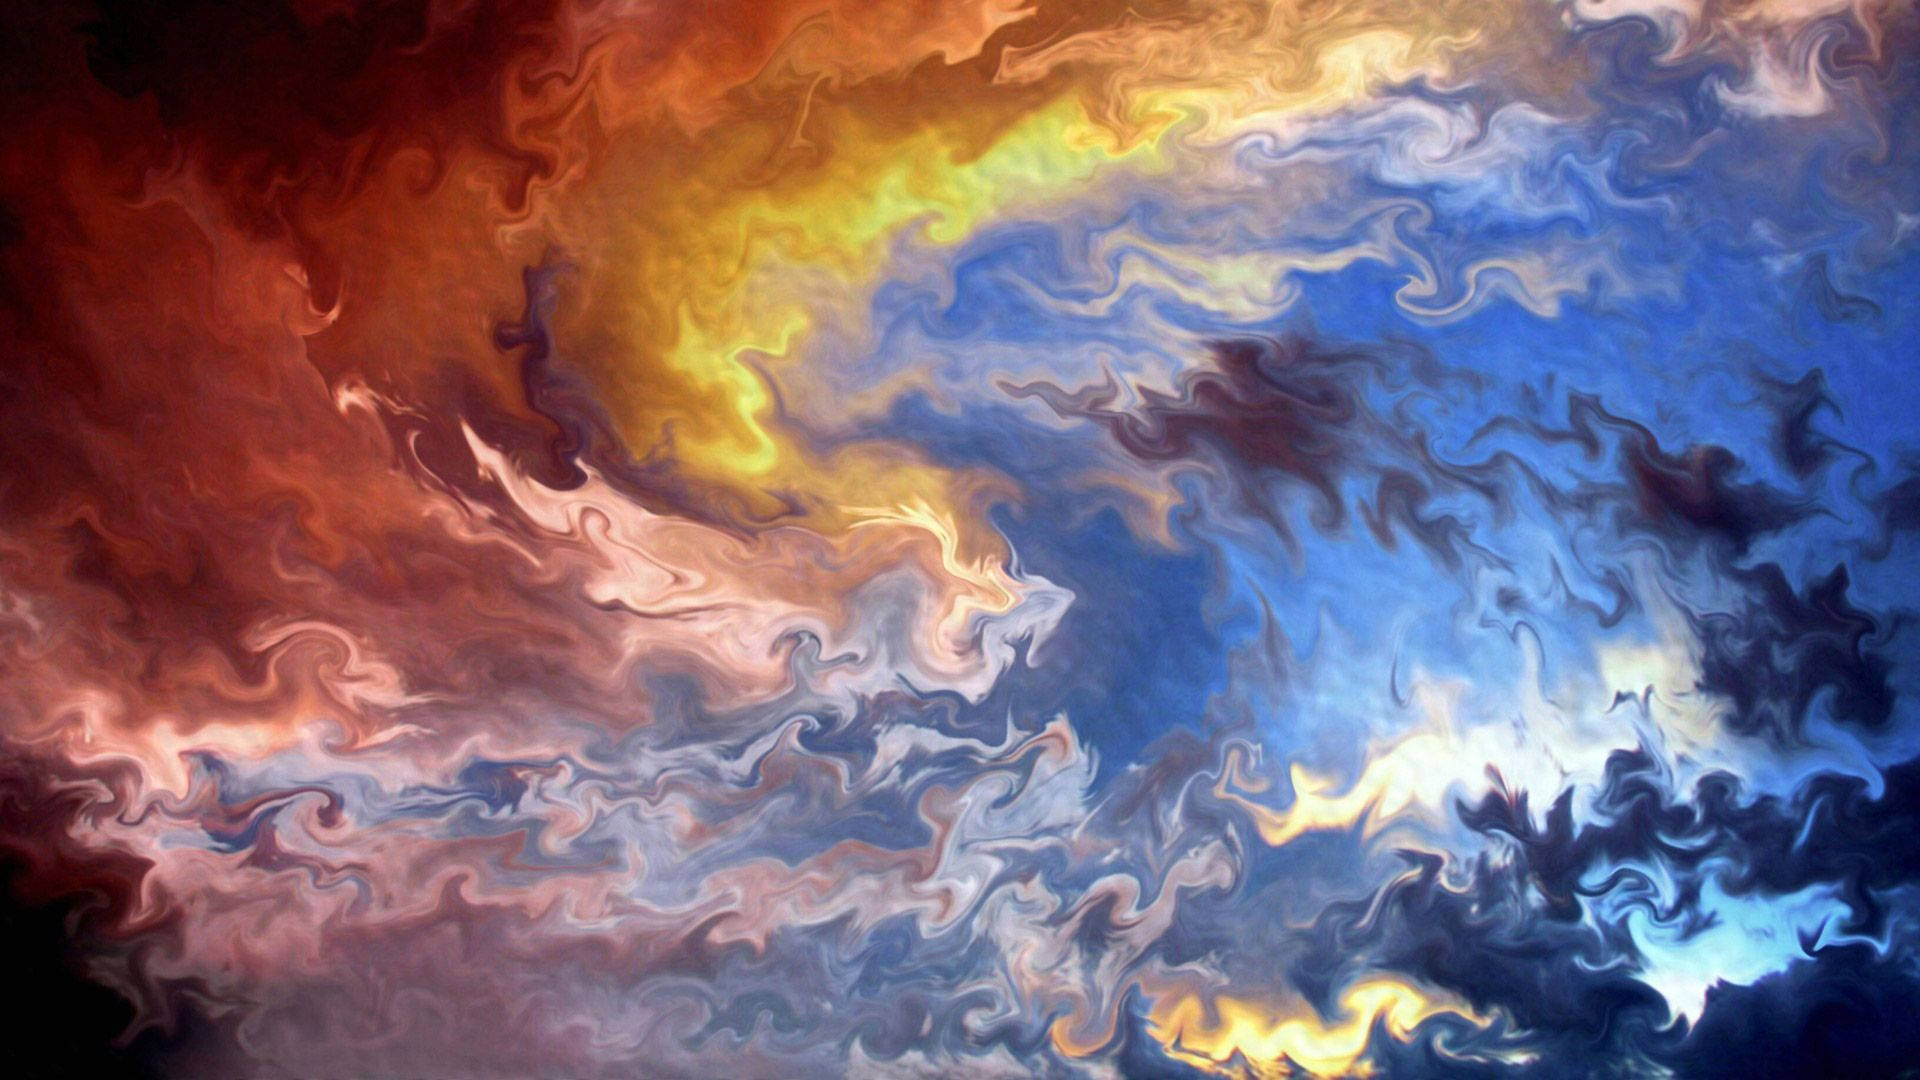 Colorful sky art made of fluid or liquid paint.